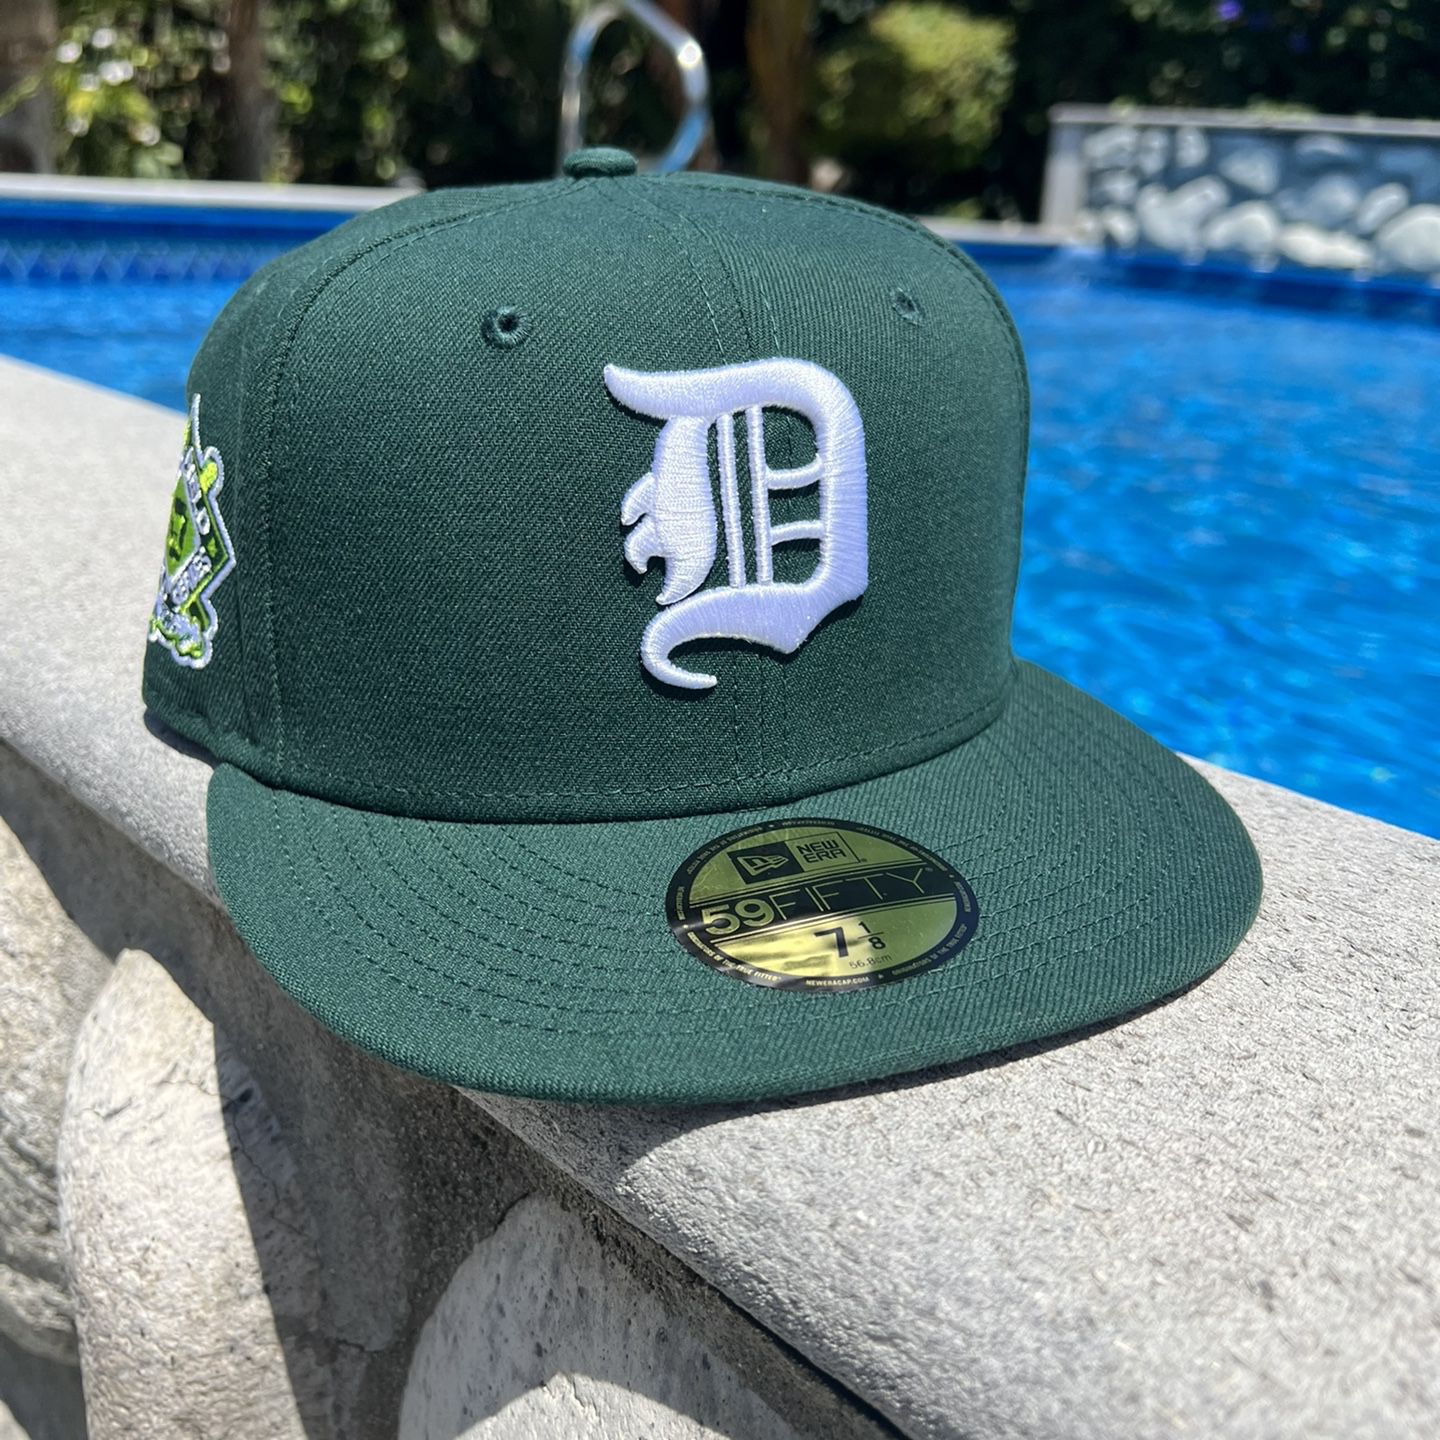 Hat Club Campus Fashion Detroit Tigers Size 7 1/8 for Sale in Whittier, CA  - OfferUp